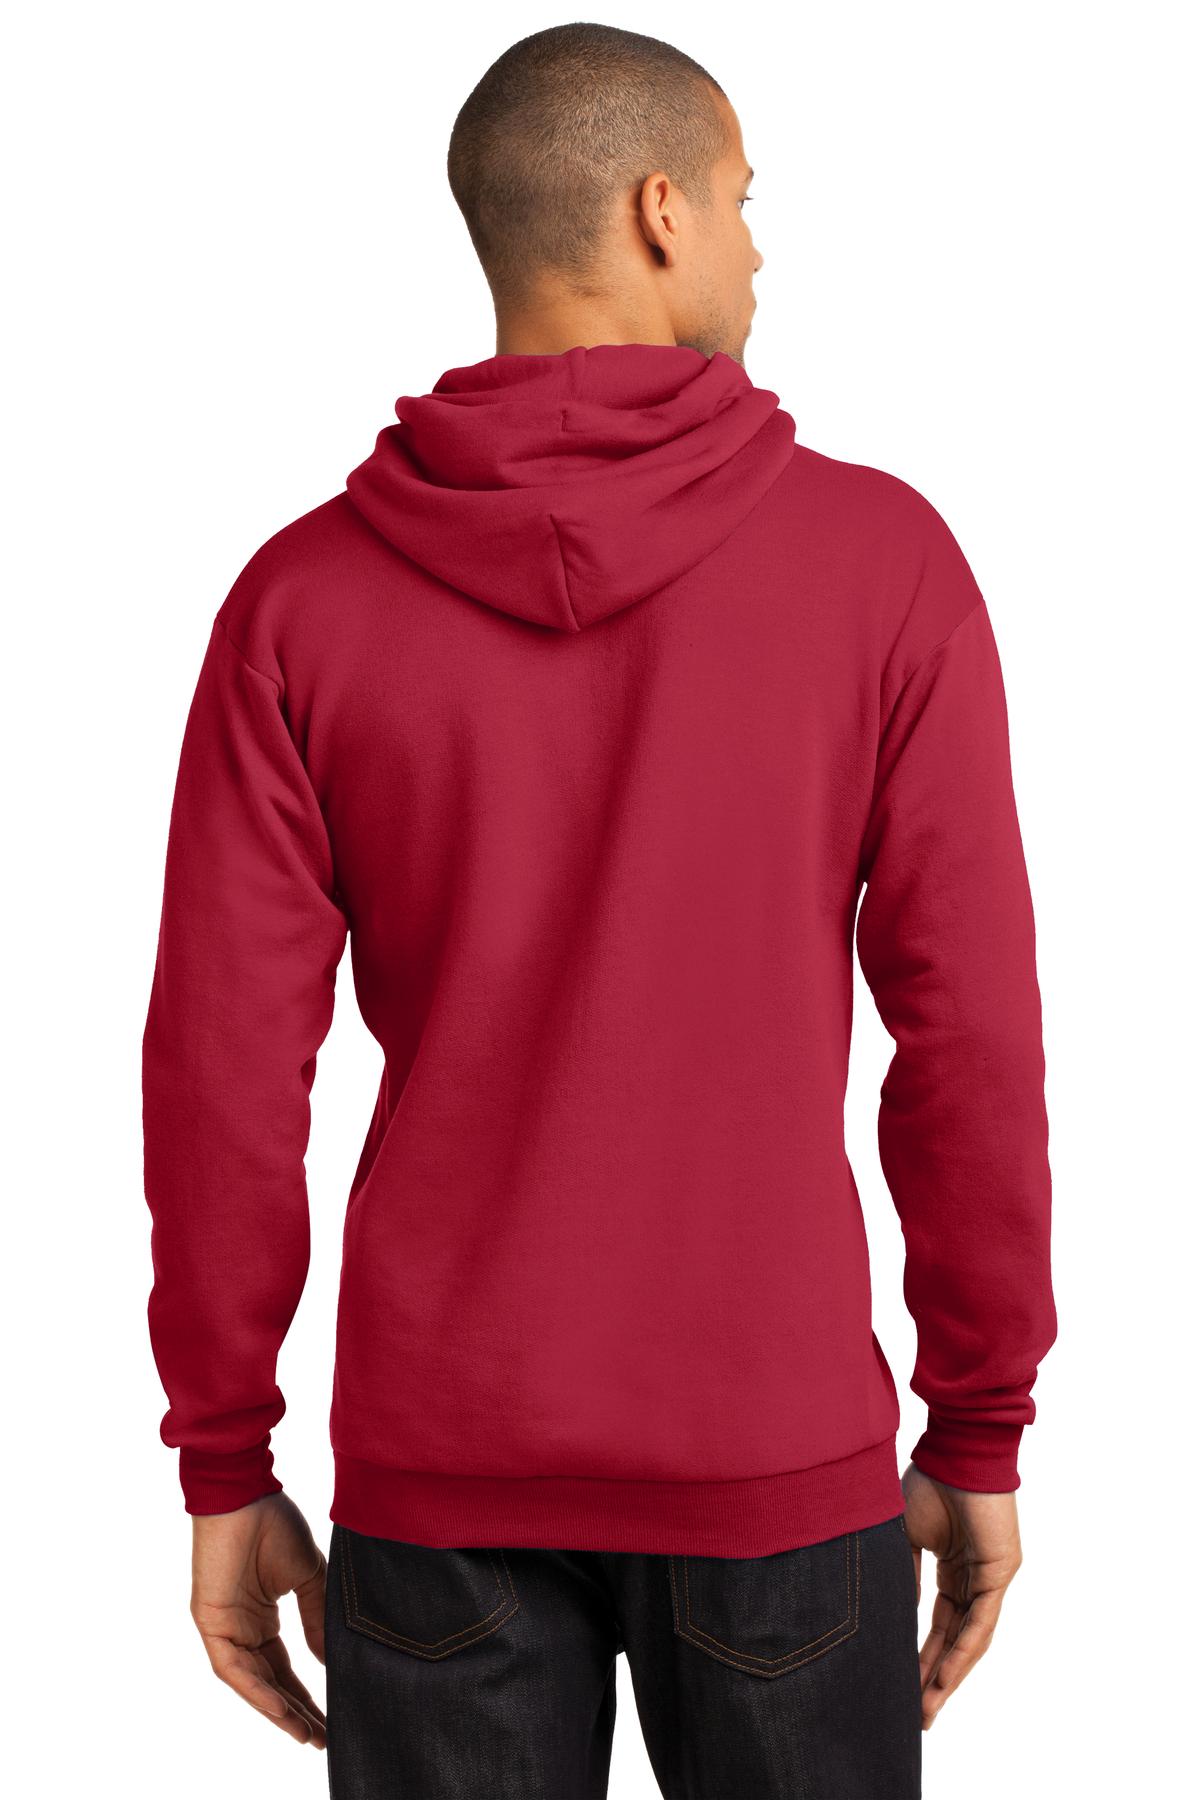 Port & Company® - Core Fleece Pullover Hooded Sweatshirt. PC78H [Red] - DFW Impression